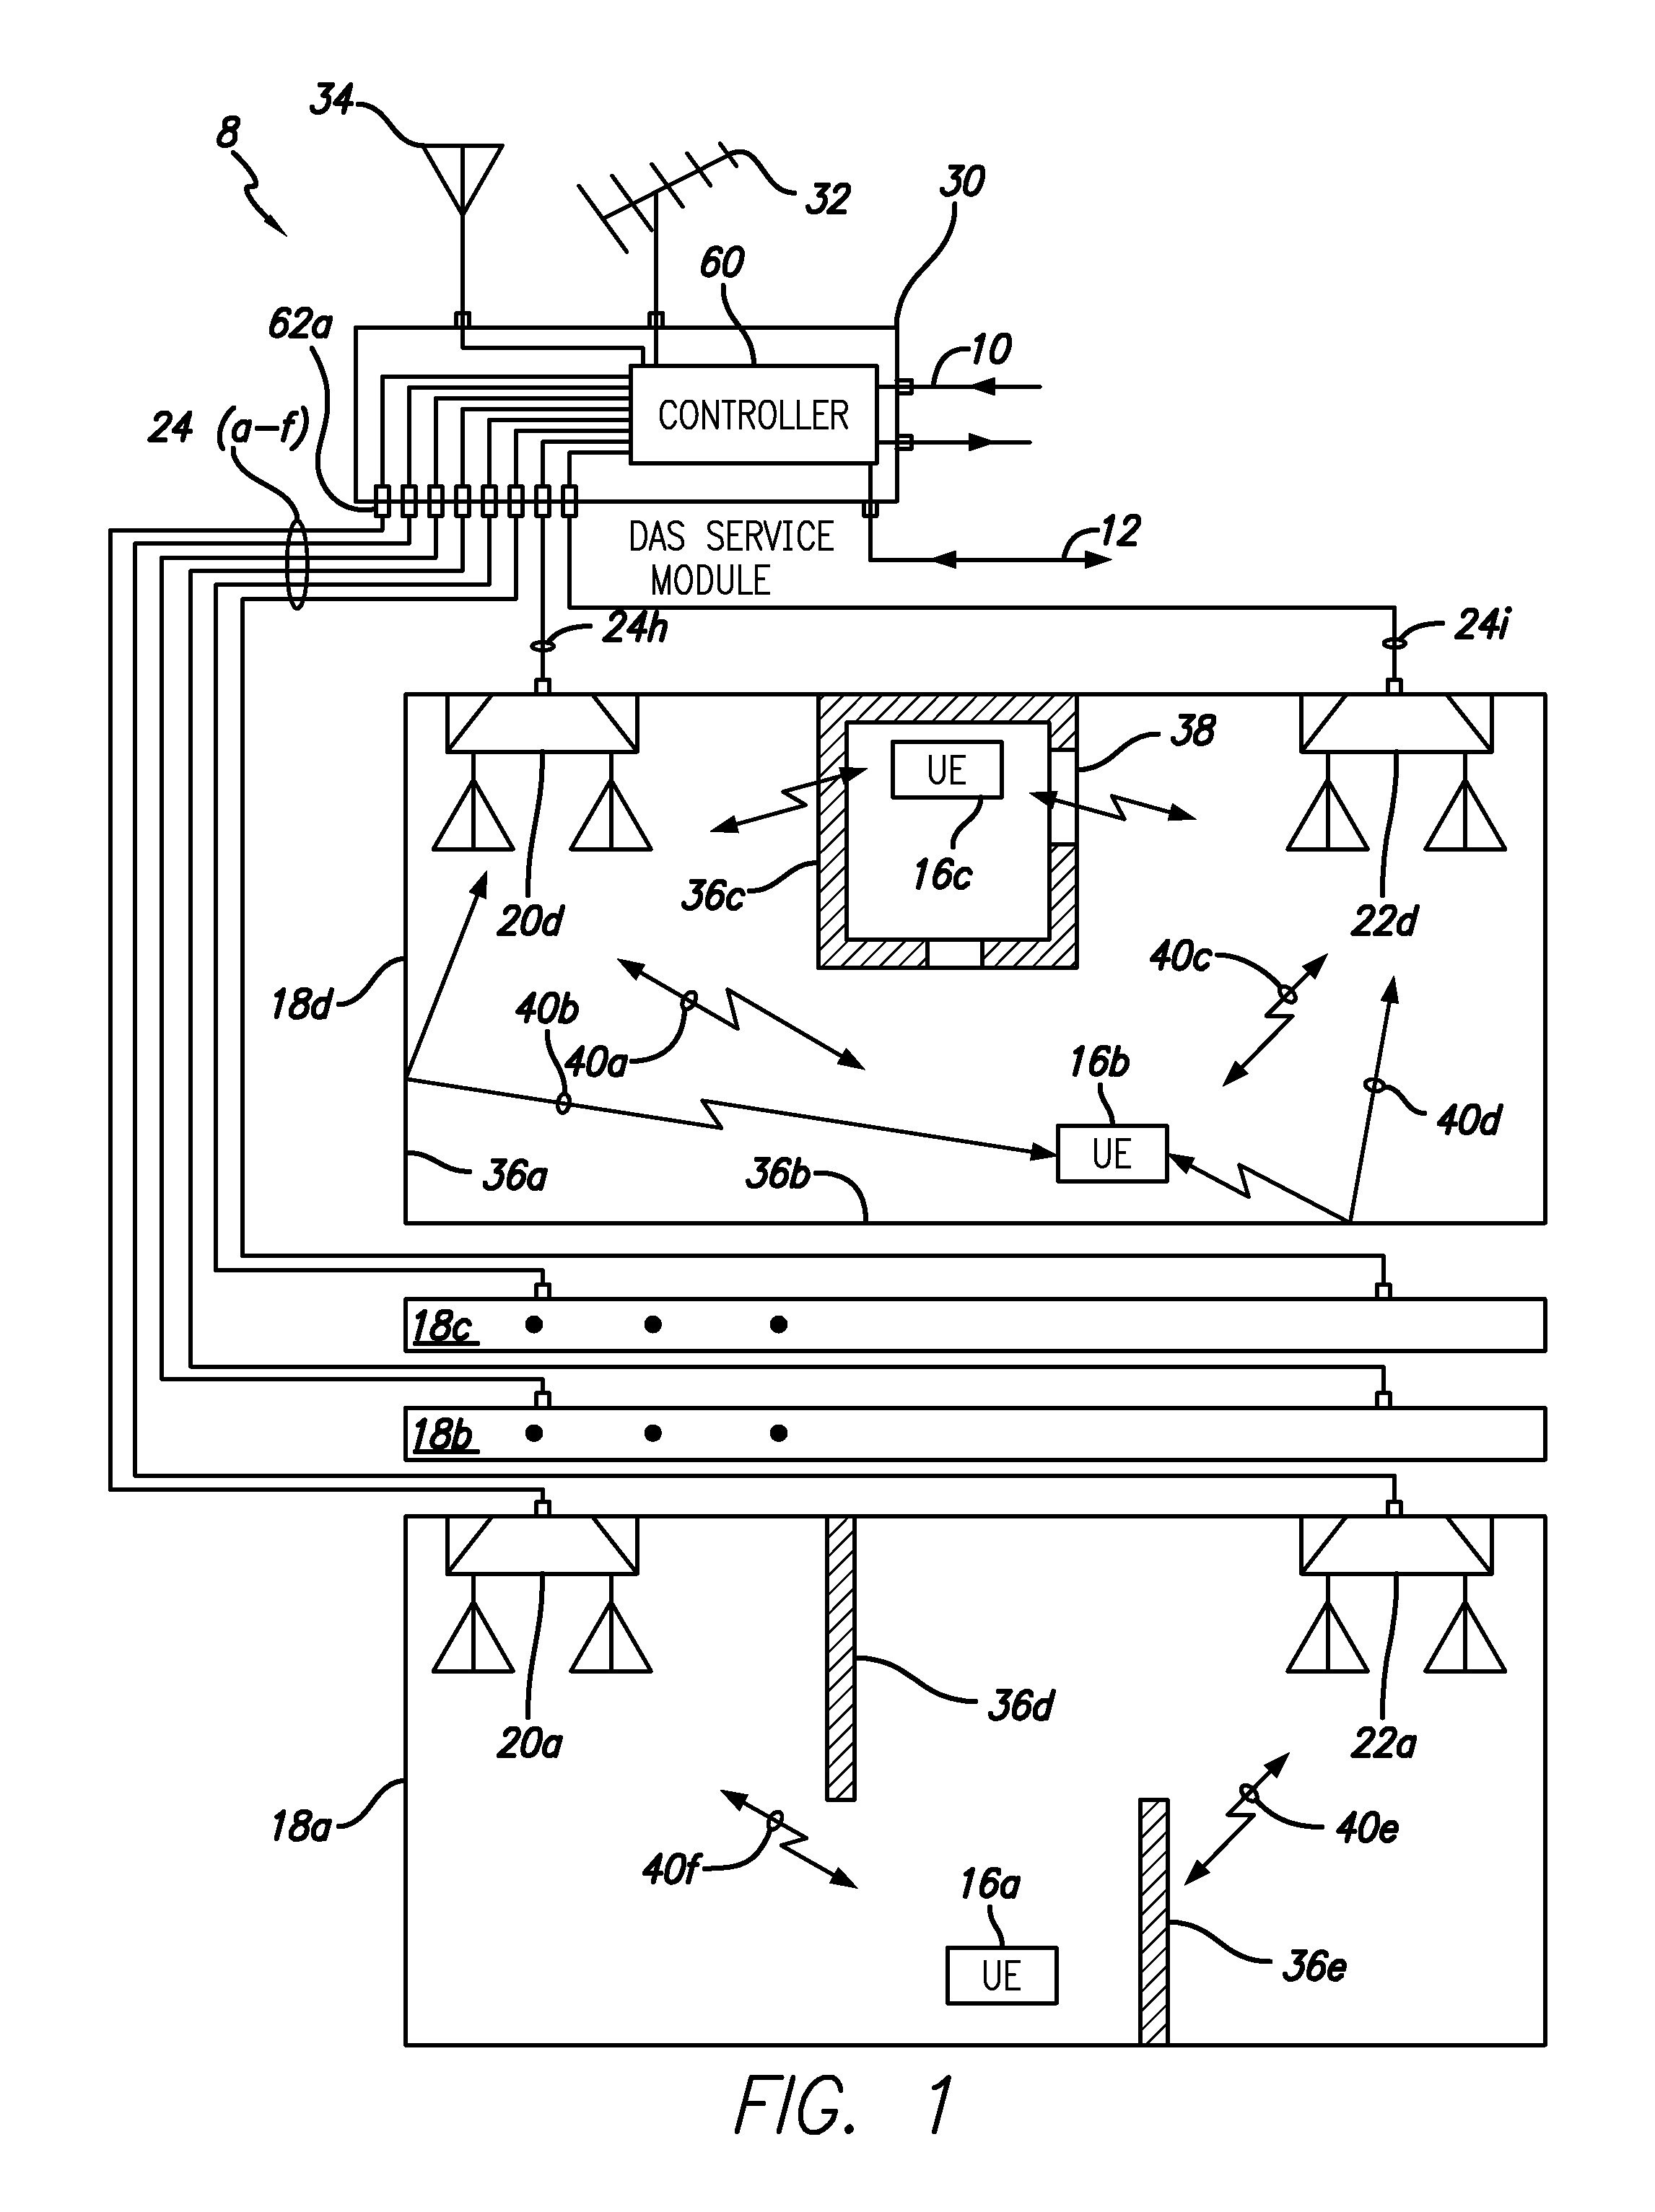 System and method for performance enhancement in heterogeneous wireless access network employing distributed antenna system